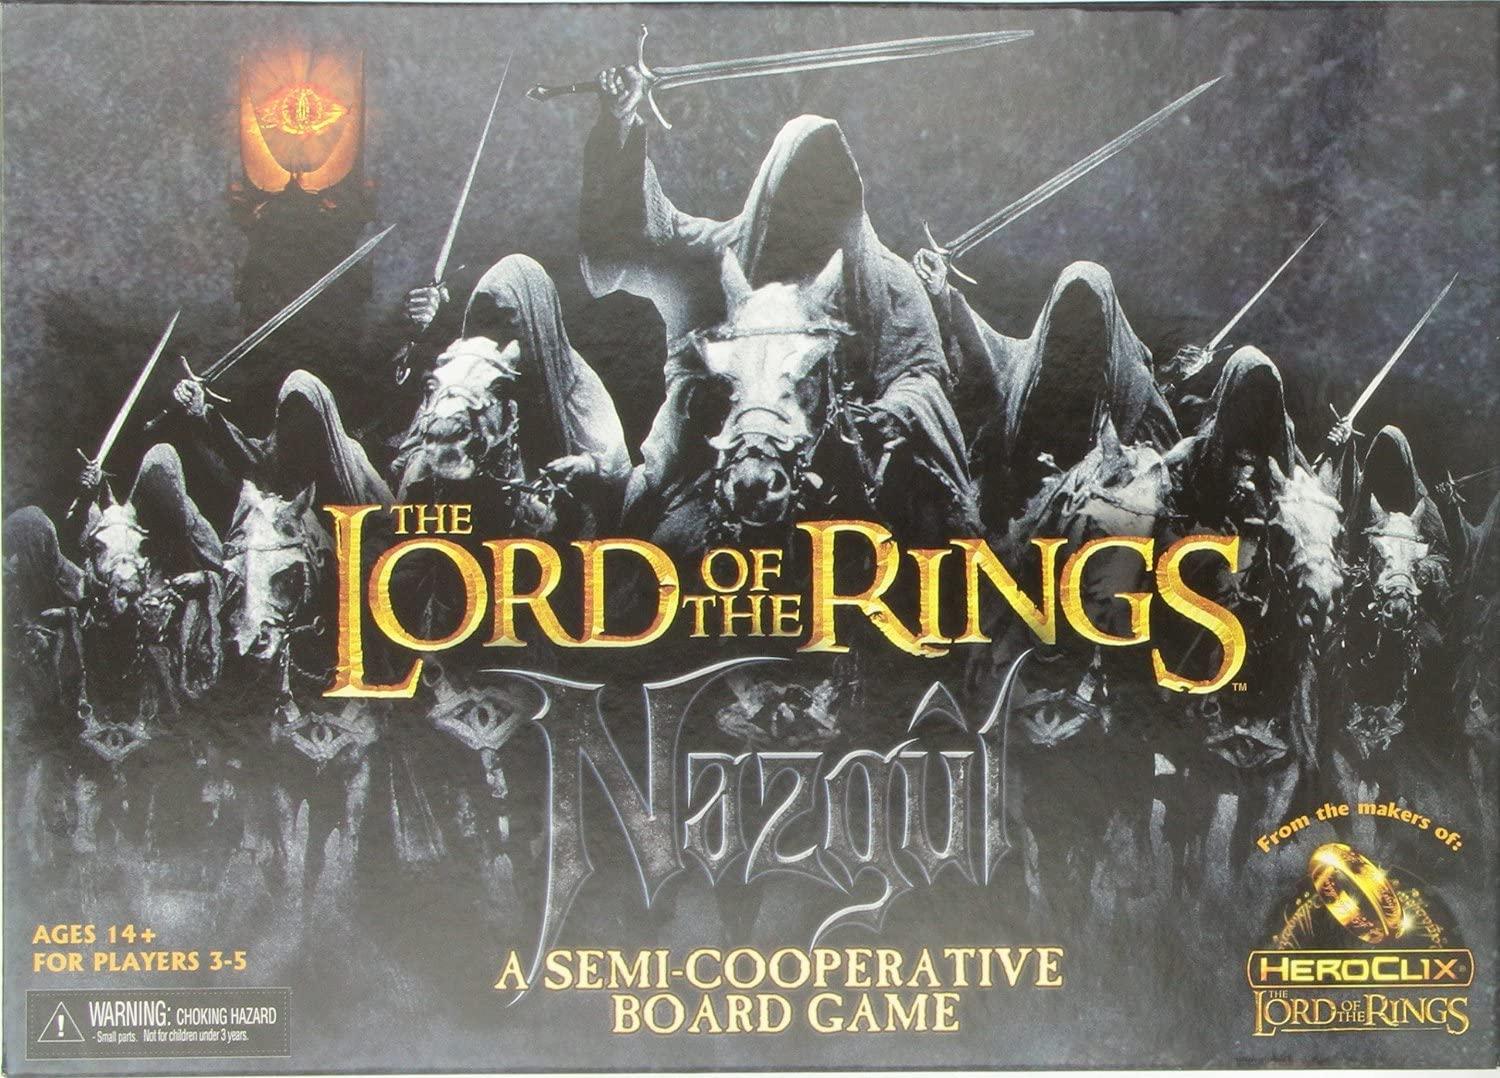 The Lord of the Rings - Nazgul (engl.)